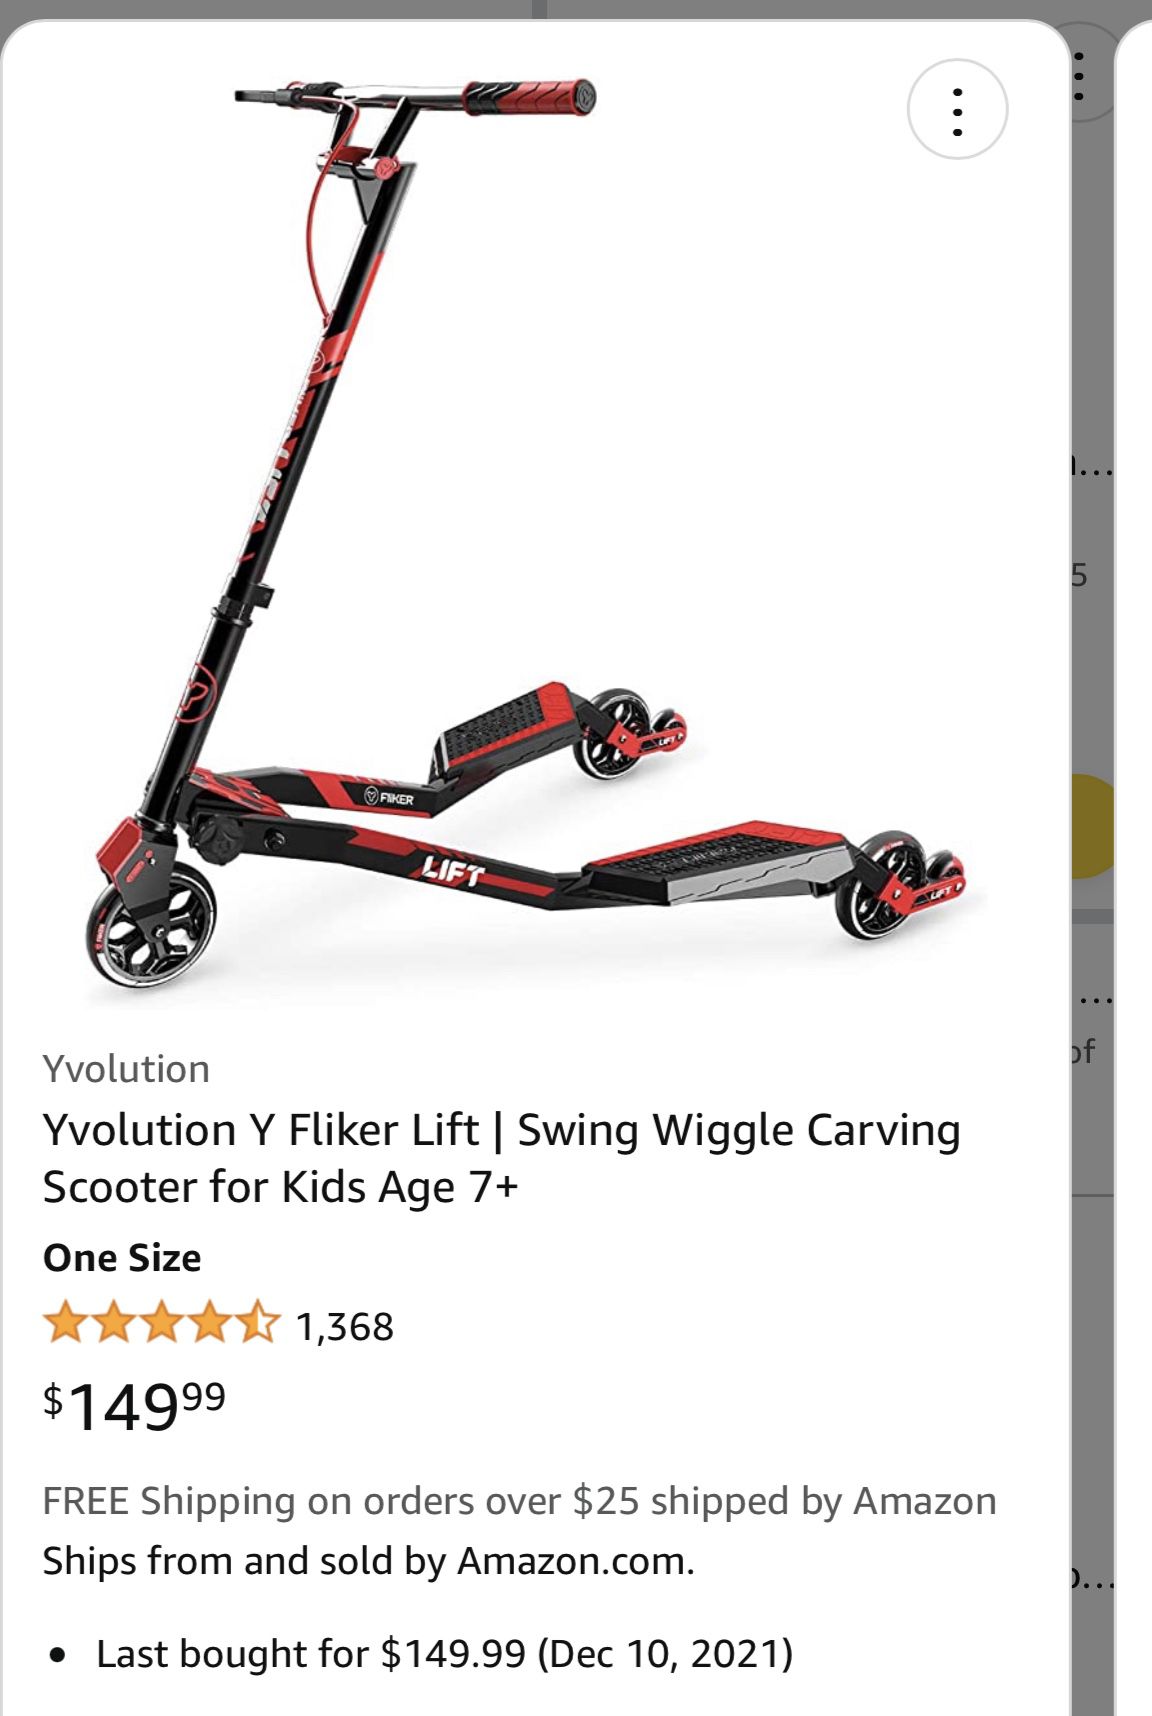 Yvolution Y Fliker Lift | Swing Wiggle Carving Scooter 